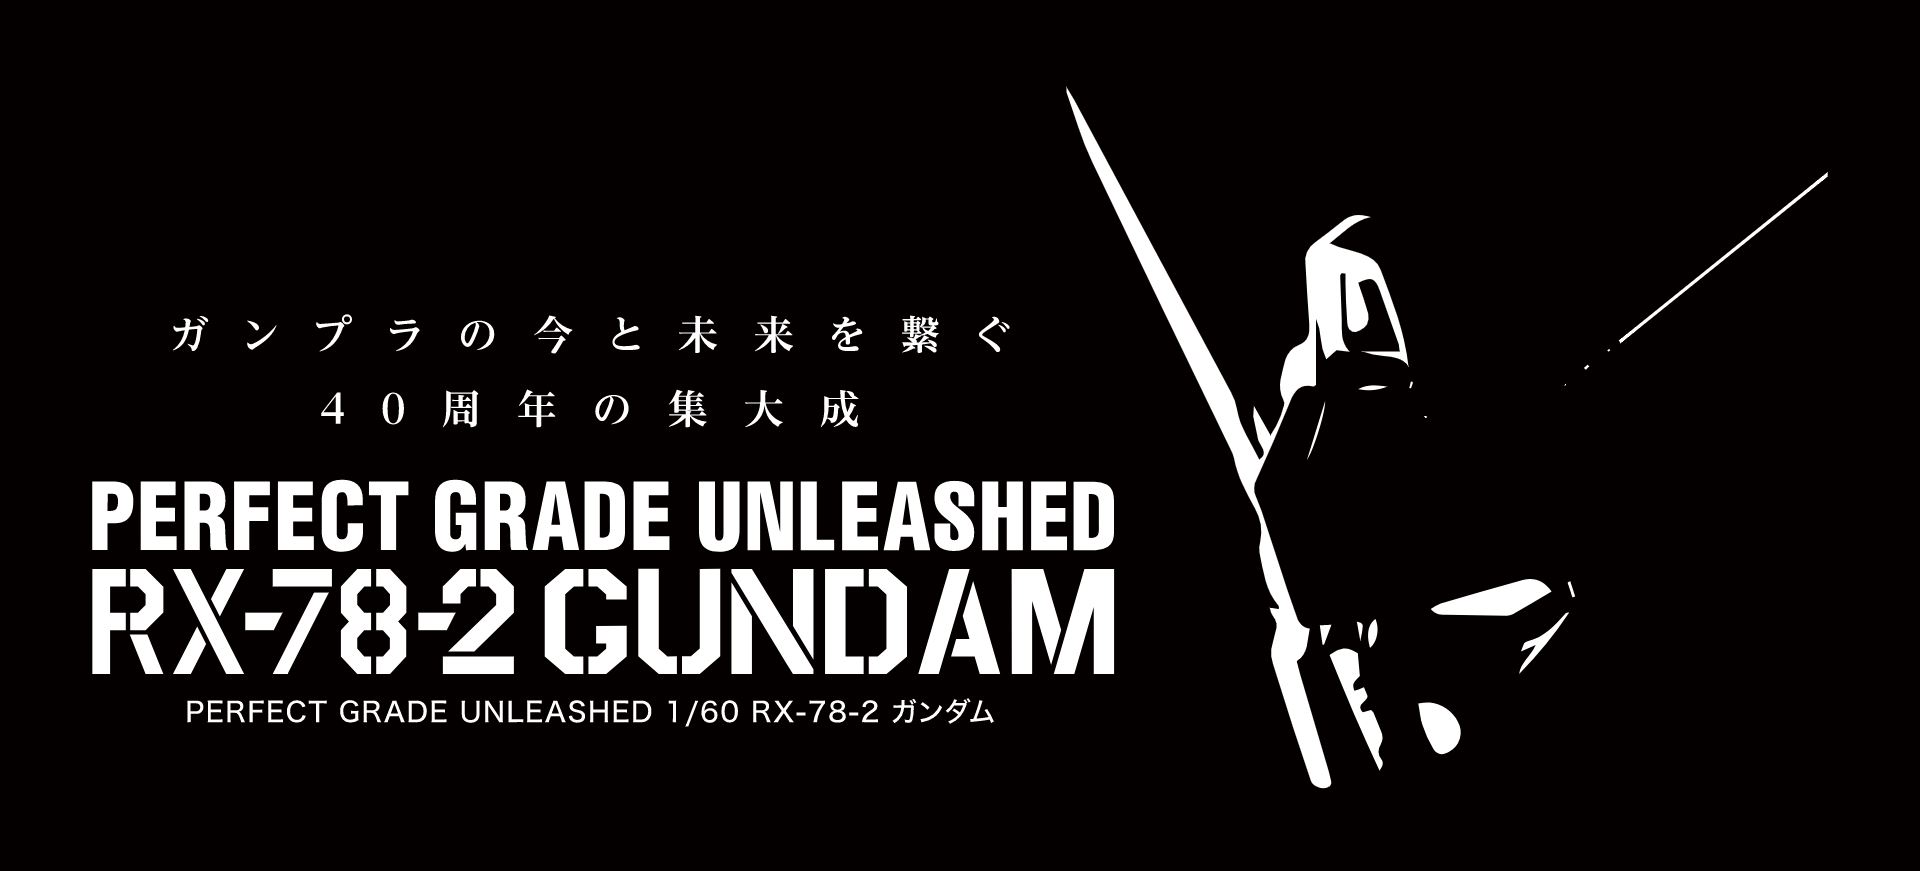 Pg Unleashed To Get A Vr Presentation In October Gundam Kits Collection News And Reviews